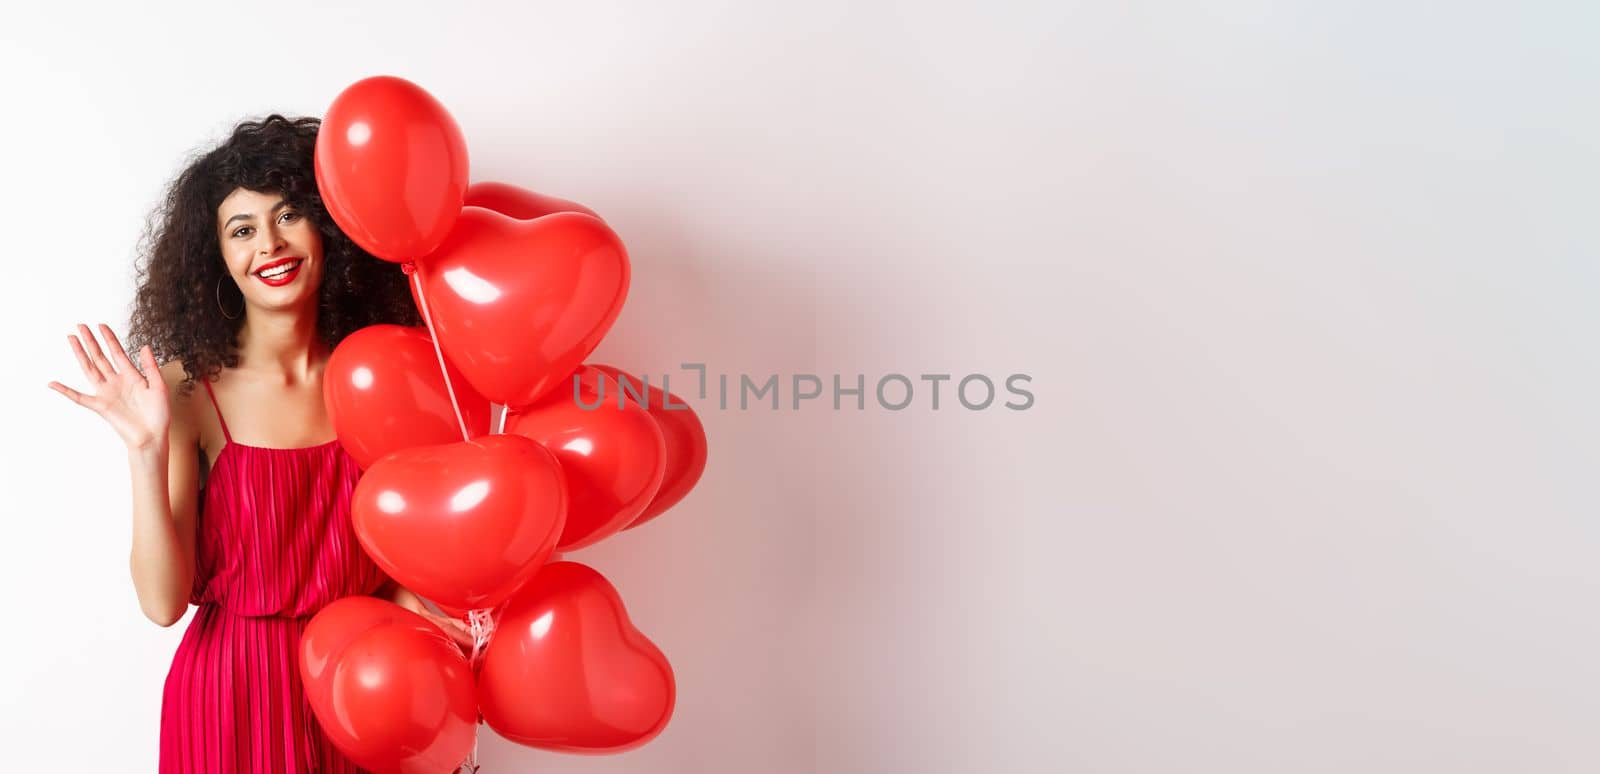 Beautiful lady with curly hair, standing near valentines holiday balloons and waving hand, saying hello, standing against white background.